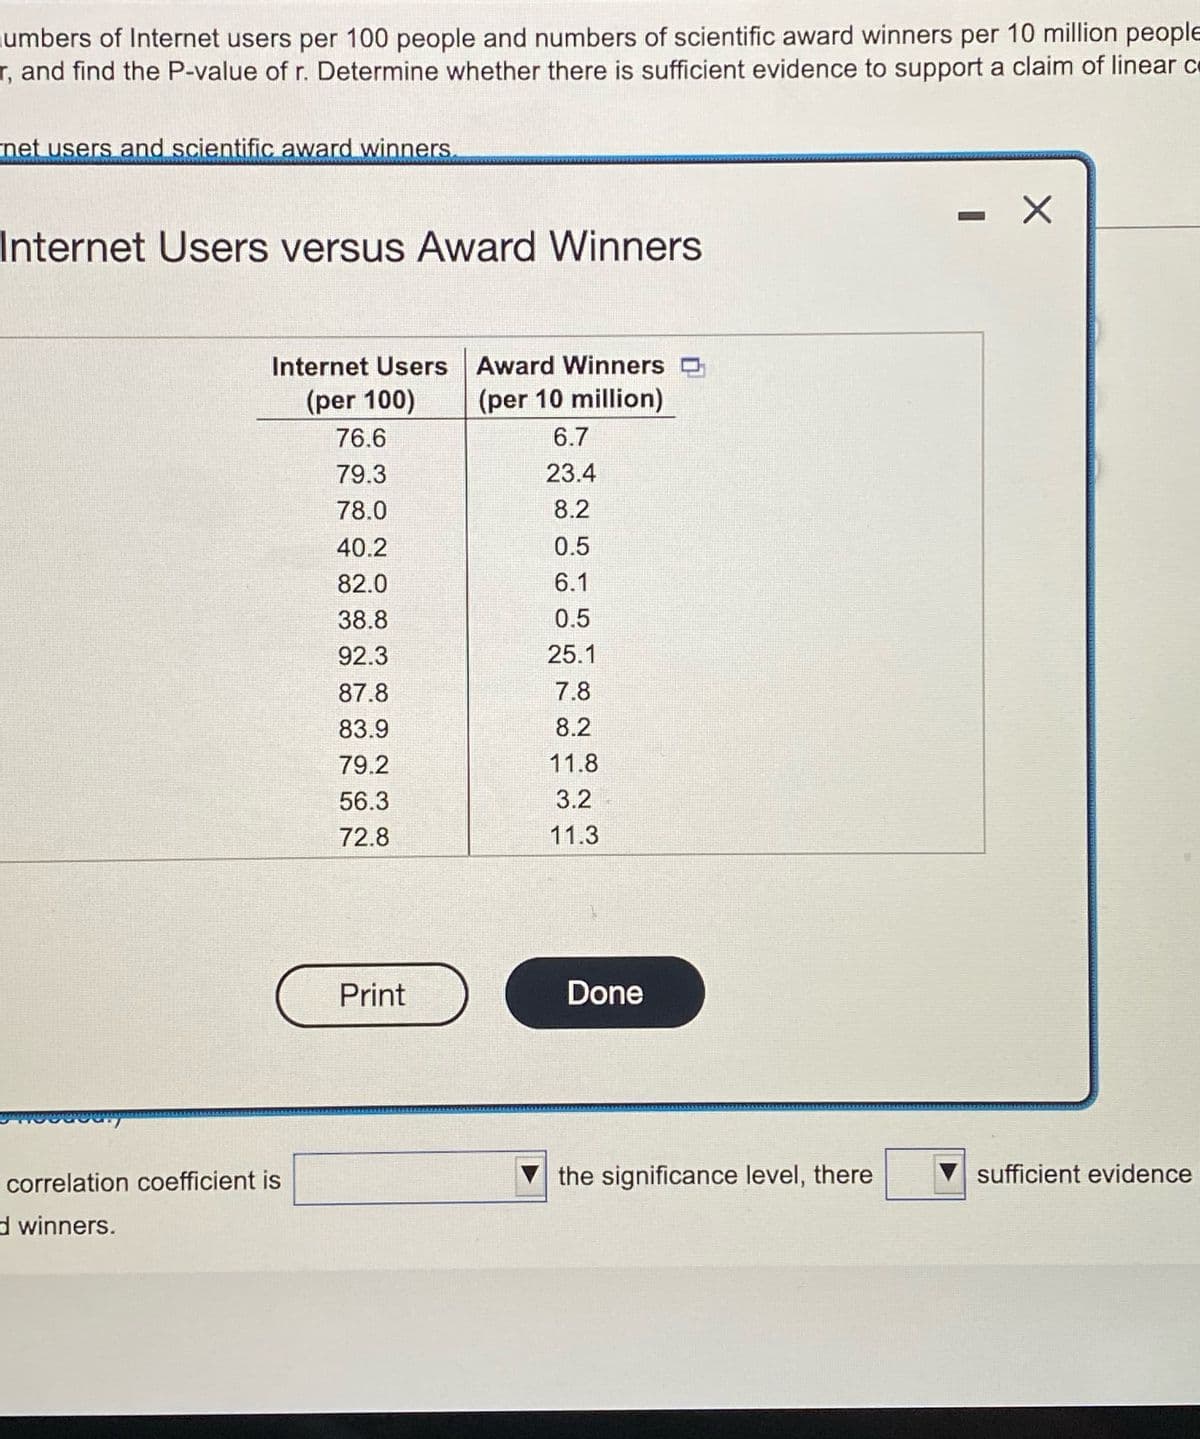 umbers of Internet users per 100 people and numbers of scientific award winners per 10 million people
r, and find the P-value of r. Determine whether there is sufficient evidence to support a claim of linear c
net users and scientific award winners.
Internet Users versus Award Winners
Internet Users
(per 100)
correlation coefficient is
d winners.
76.6
79.3
78.0
40.2
82.0
38.8
92.3
87.8
83.9
79.2
56.3
72.8
Print
Award Winners
(per 10 million)
6.7
23.4
8.2
0.5
6.1
0.5
25.1
7.8
8.2
11.8
3.2
11.3
Done
the significance level, there
X
sufficient evidence